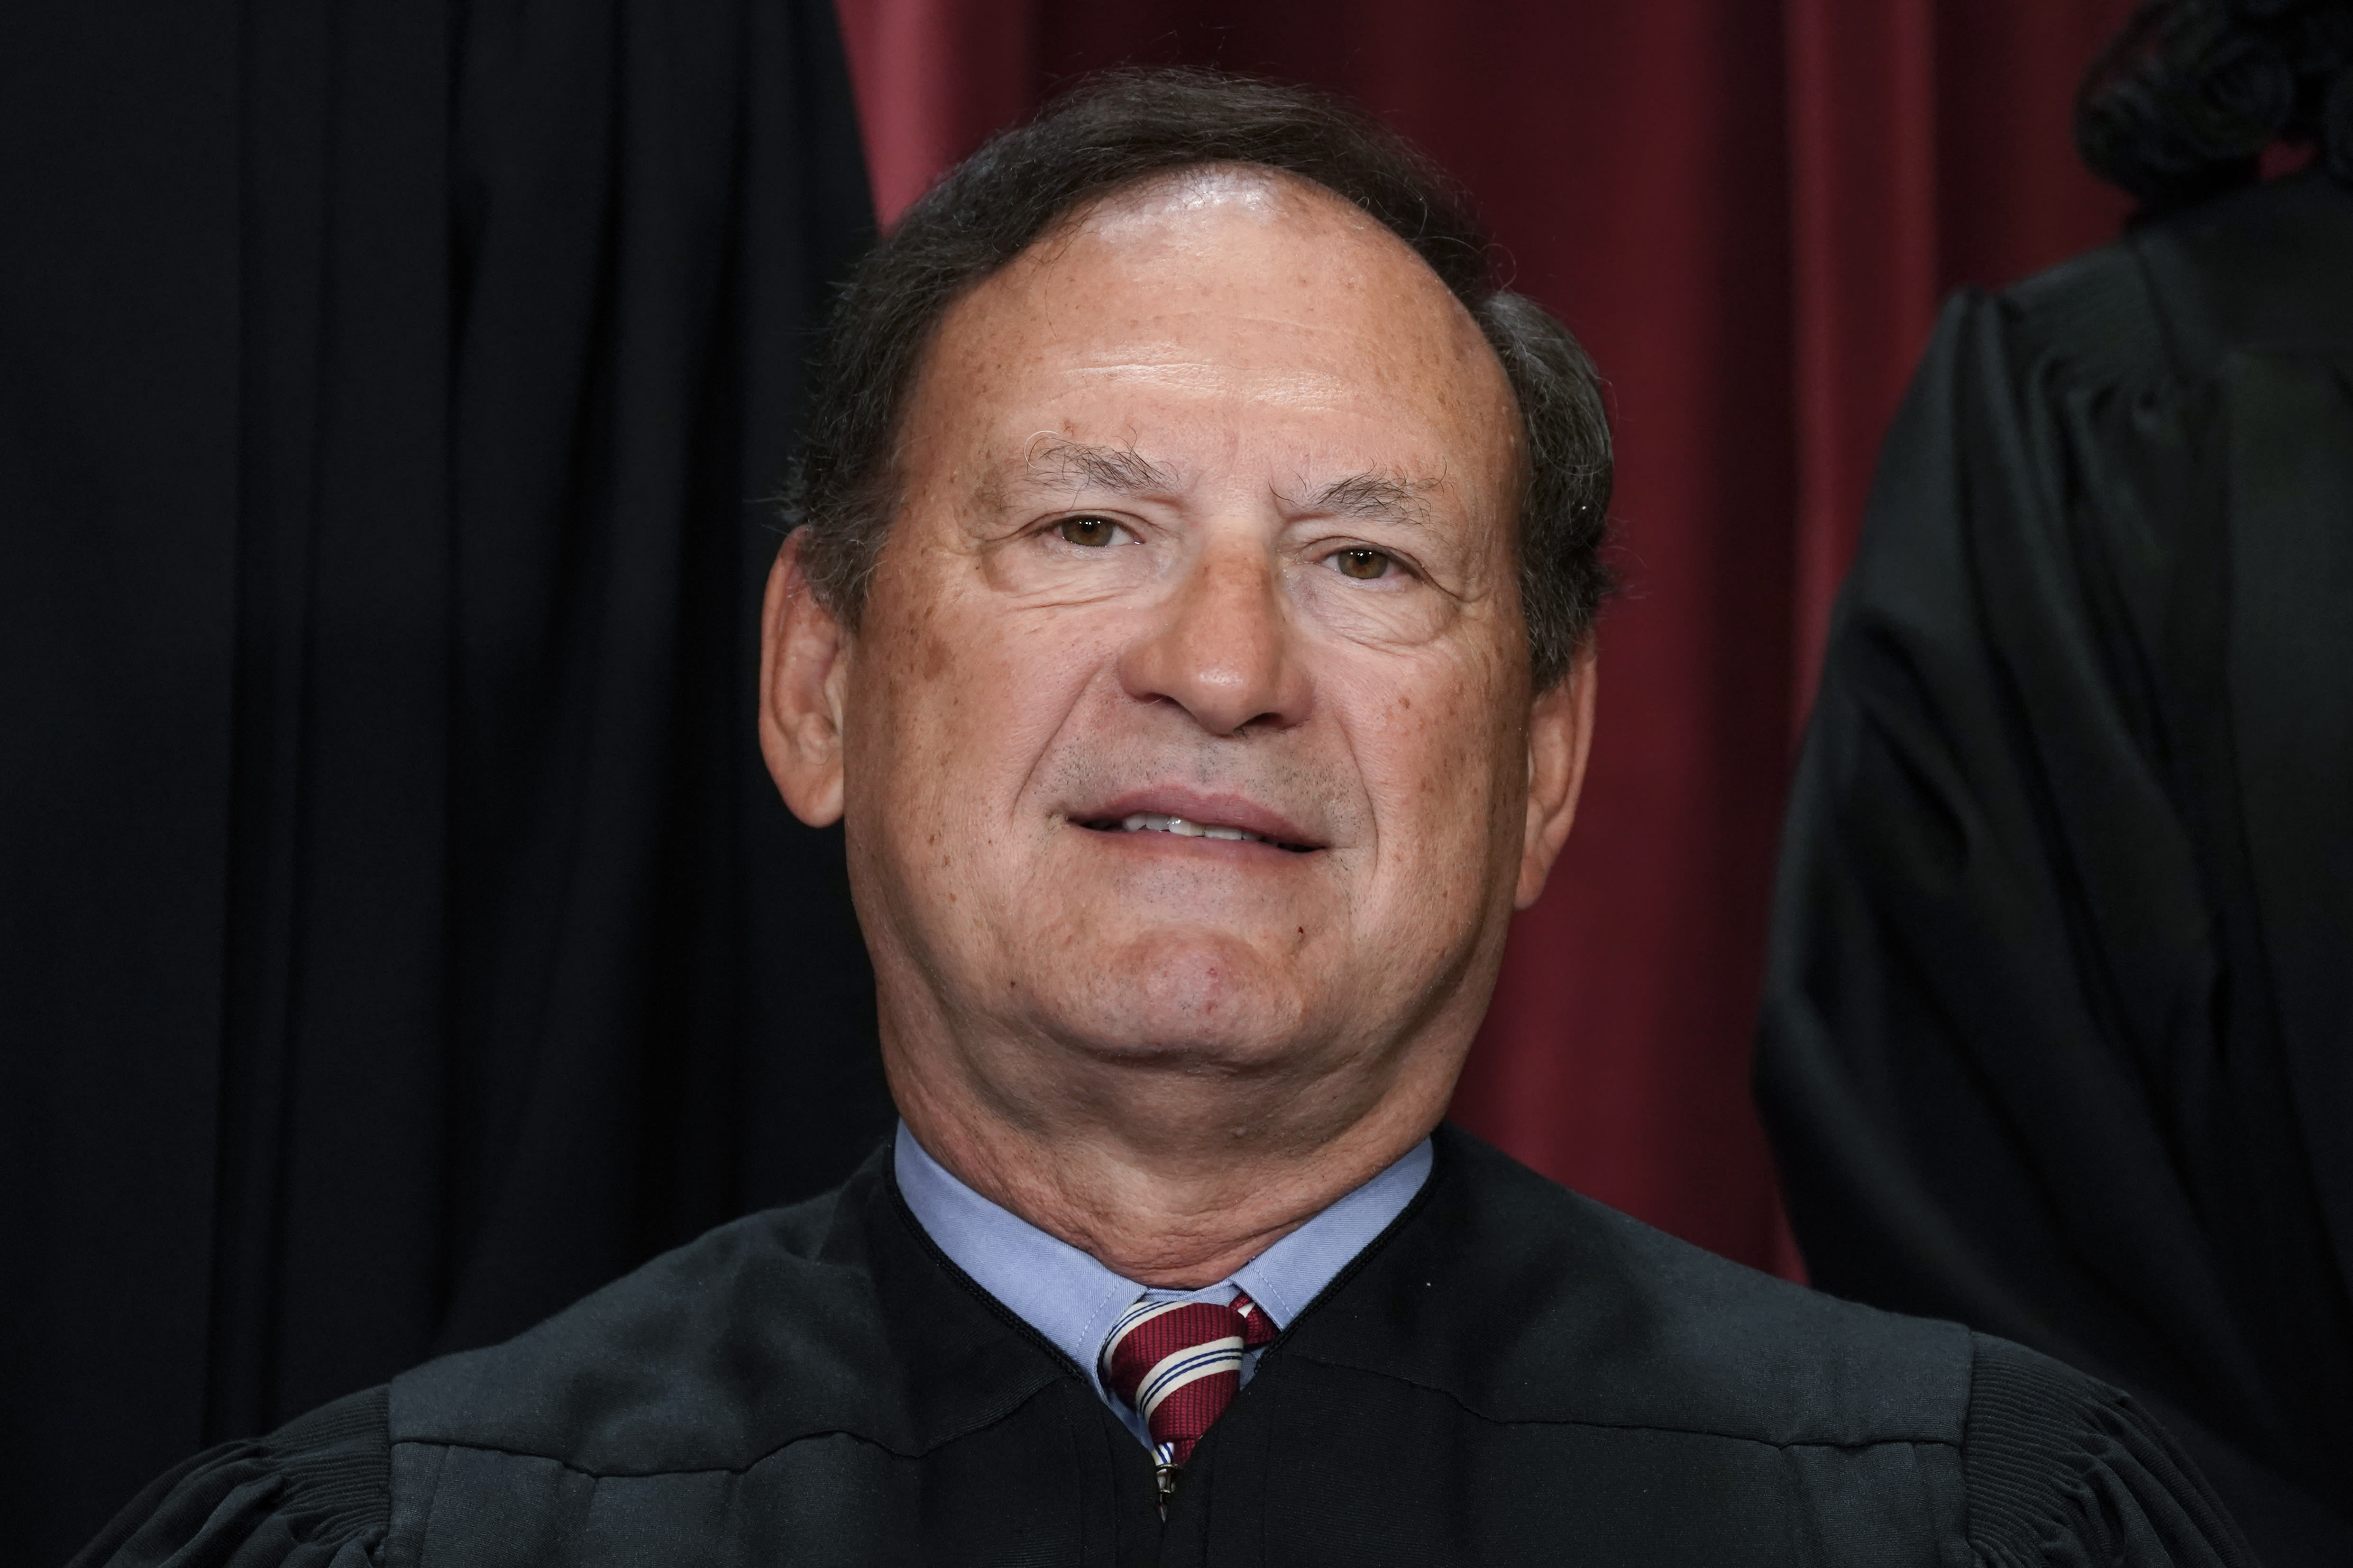 Abcarian: Samuel Alito's ethical lapse isn't the Supreme Court's first. This is why it's different